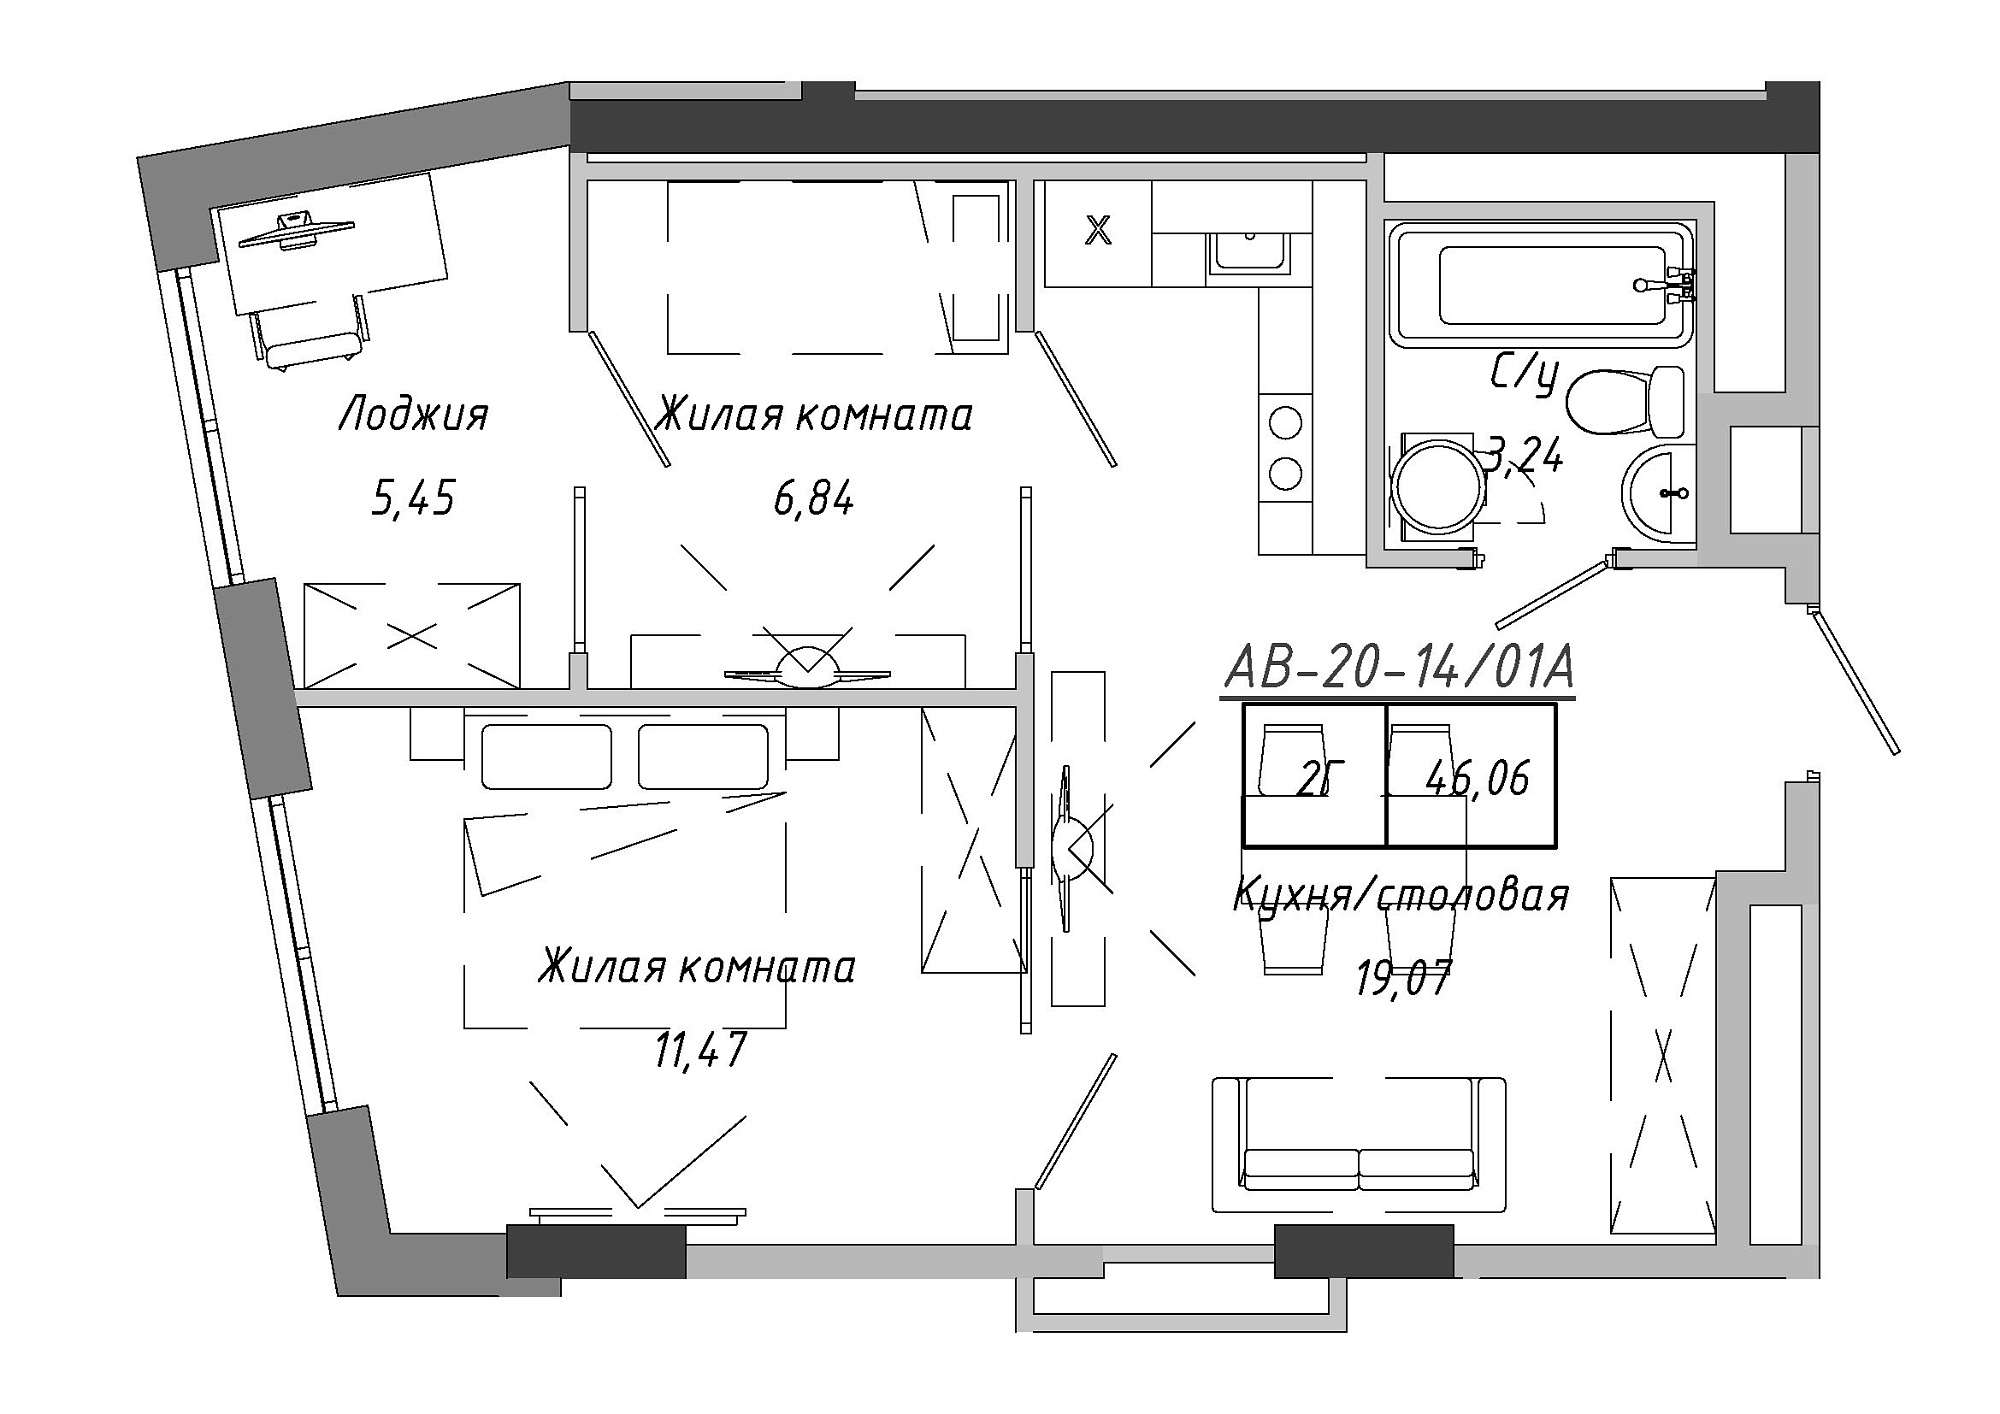 Planning 2-rm flats area 46.06m2, AB-20-14/0101a.